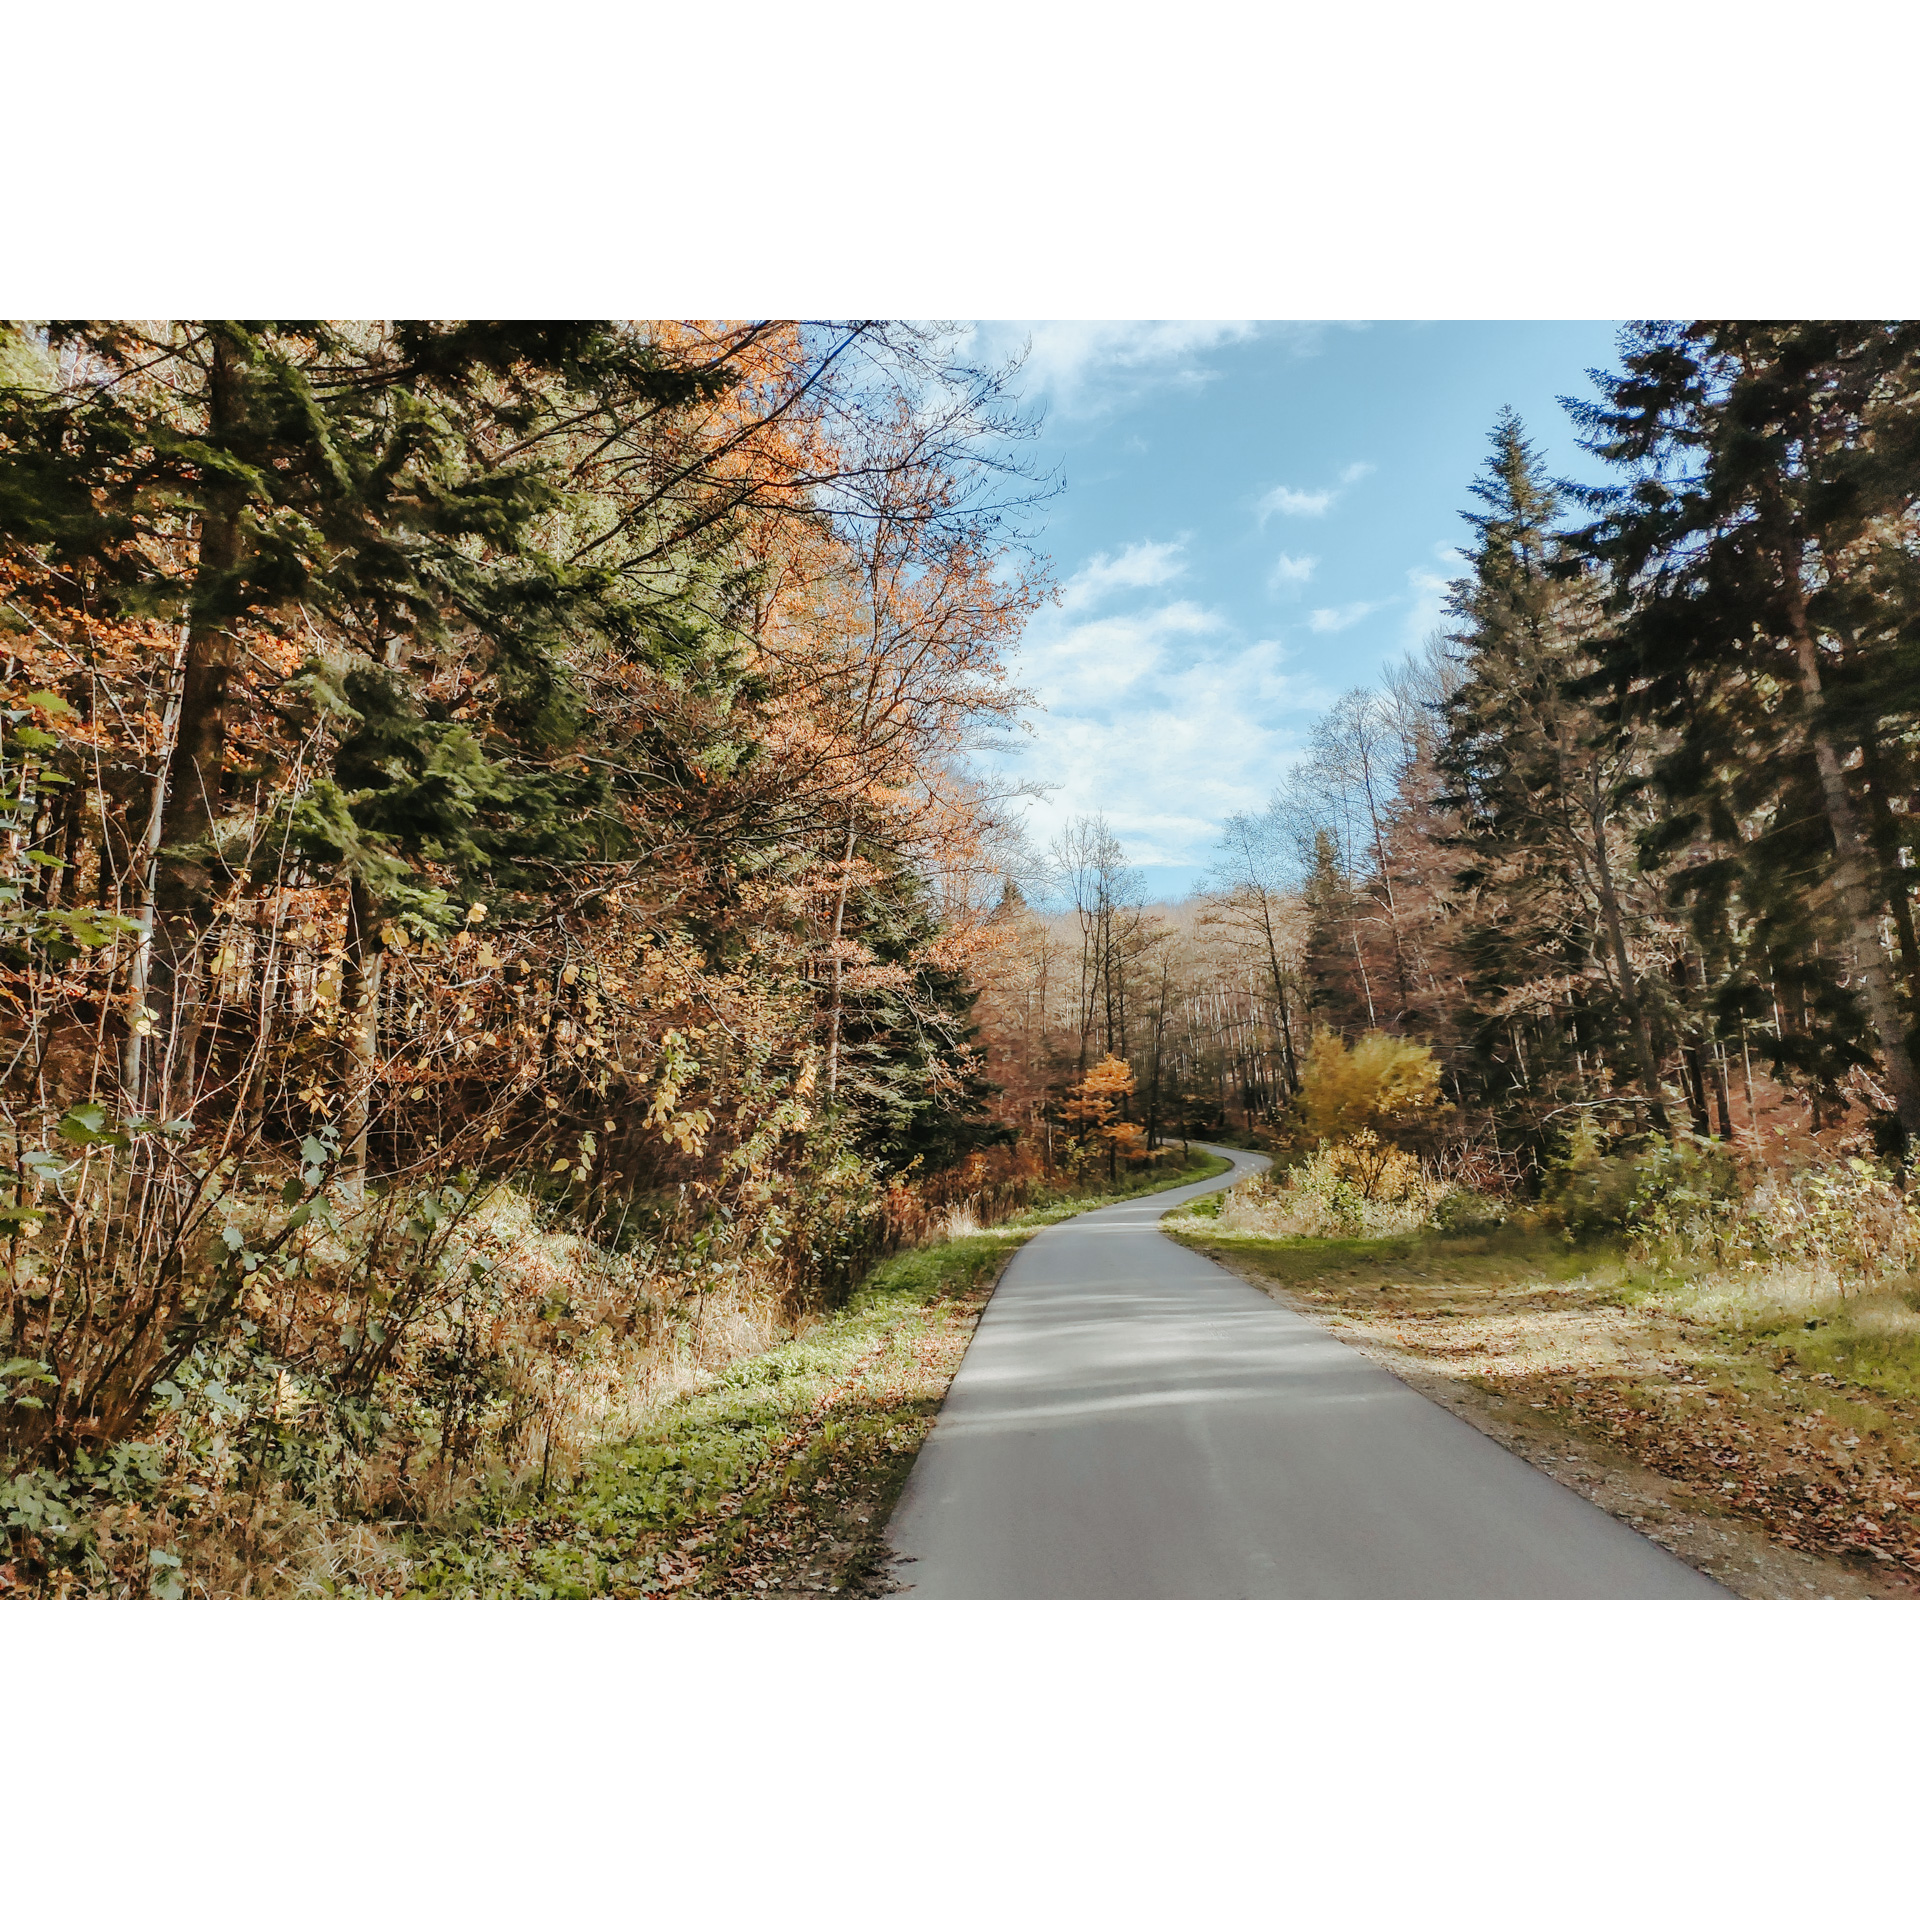 Asphalt road in the forest running between tall coniferous and deciduous trees